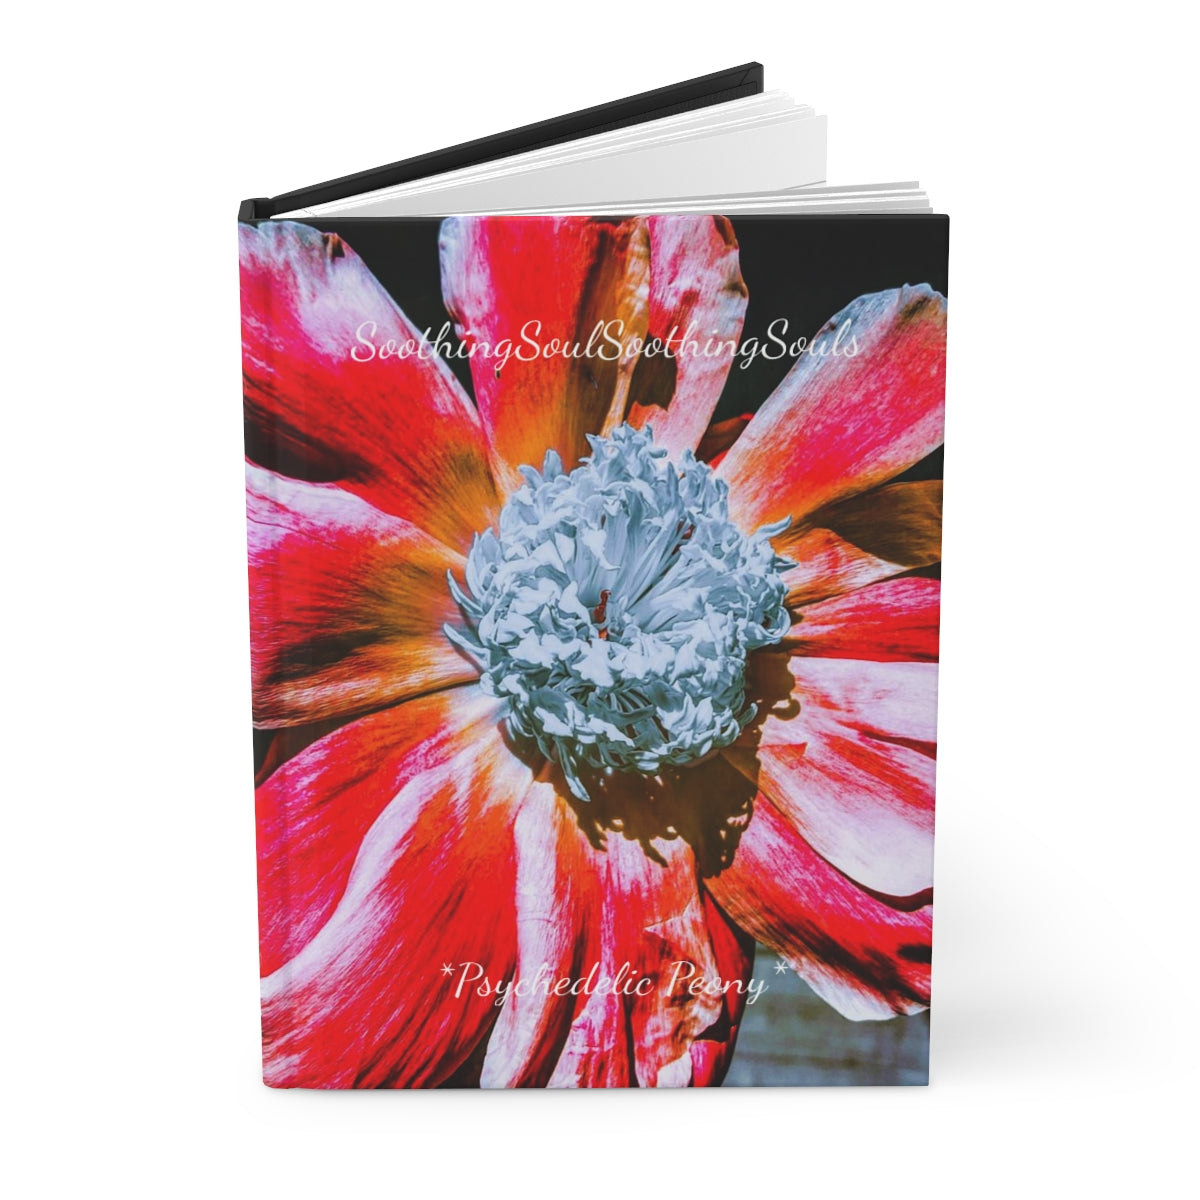 SSSS Psychedelic Peony Hardcover Journal